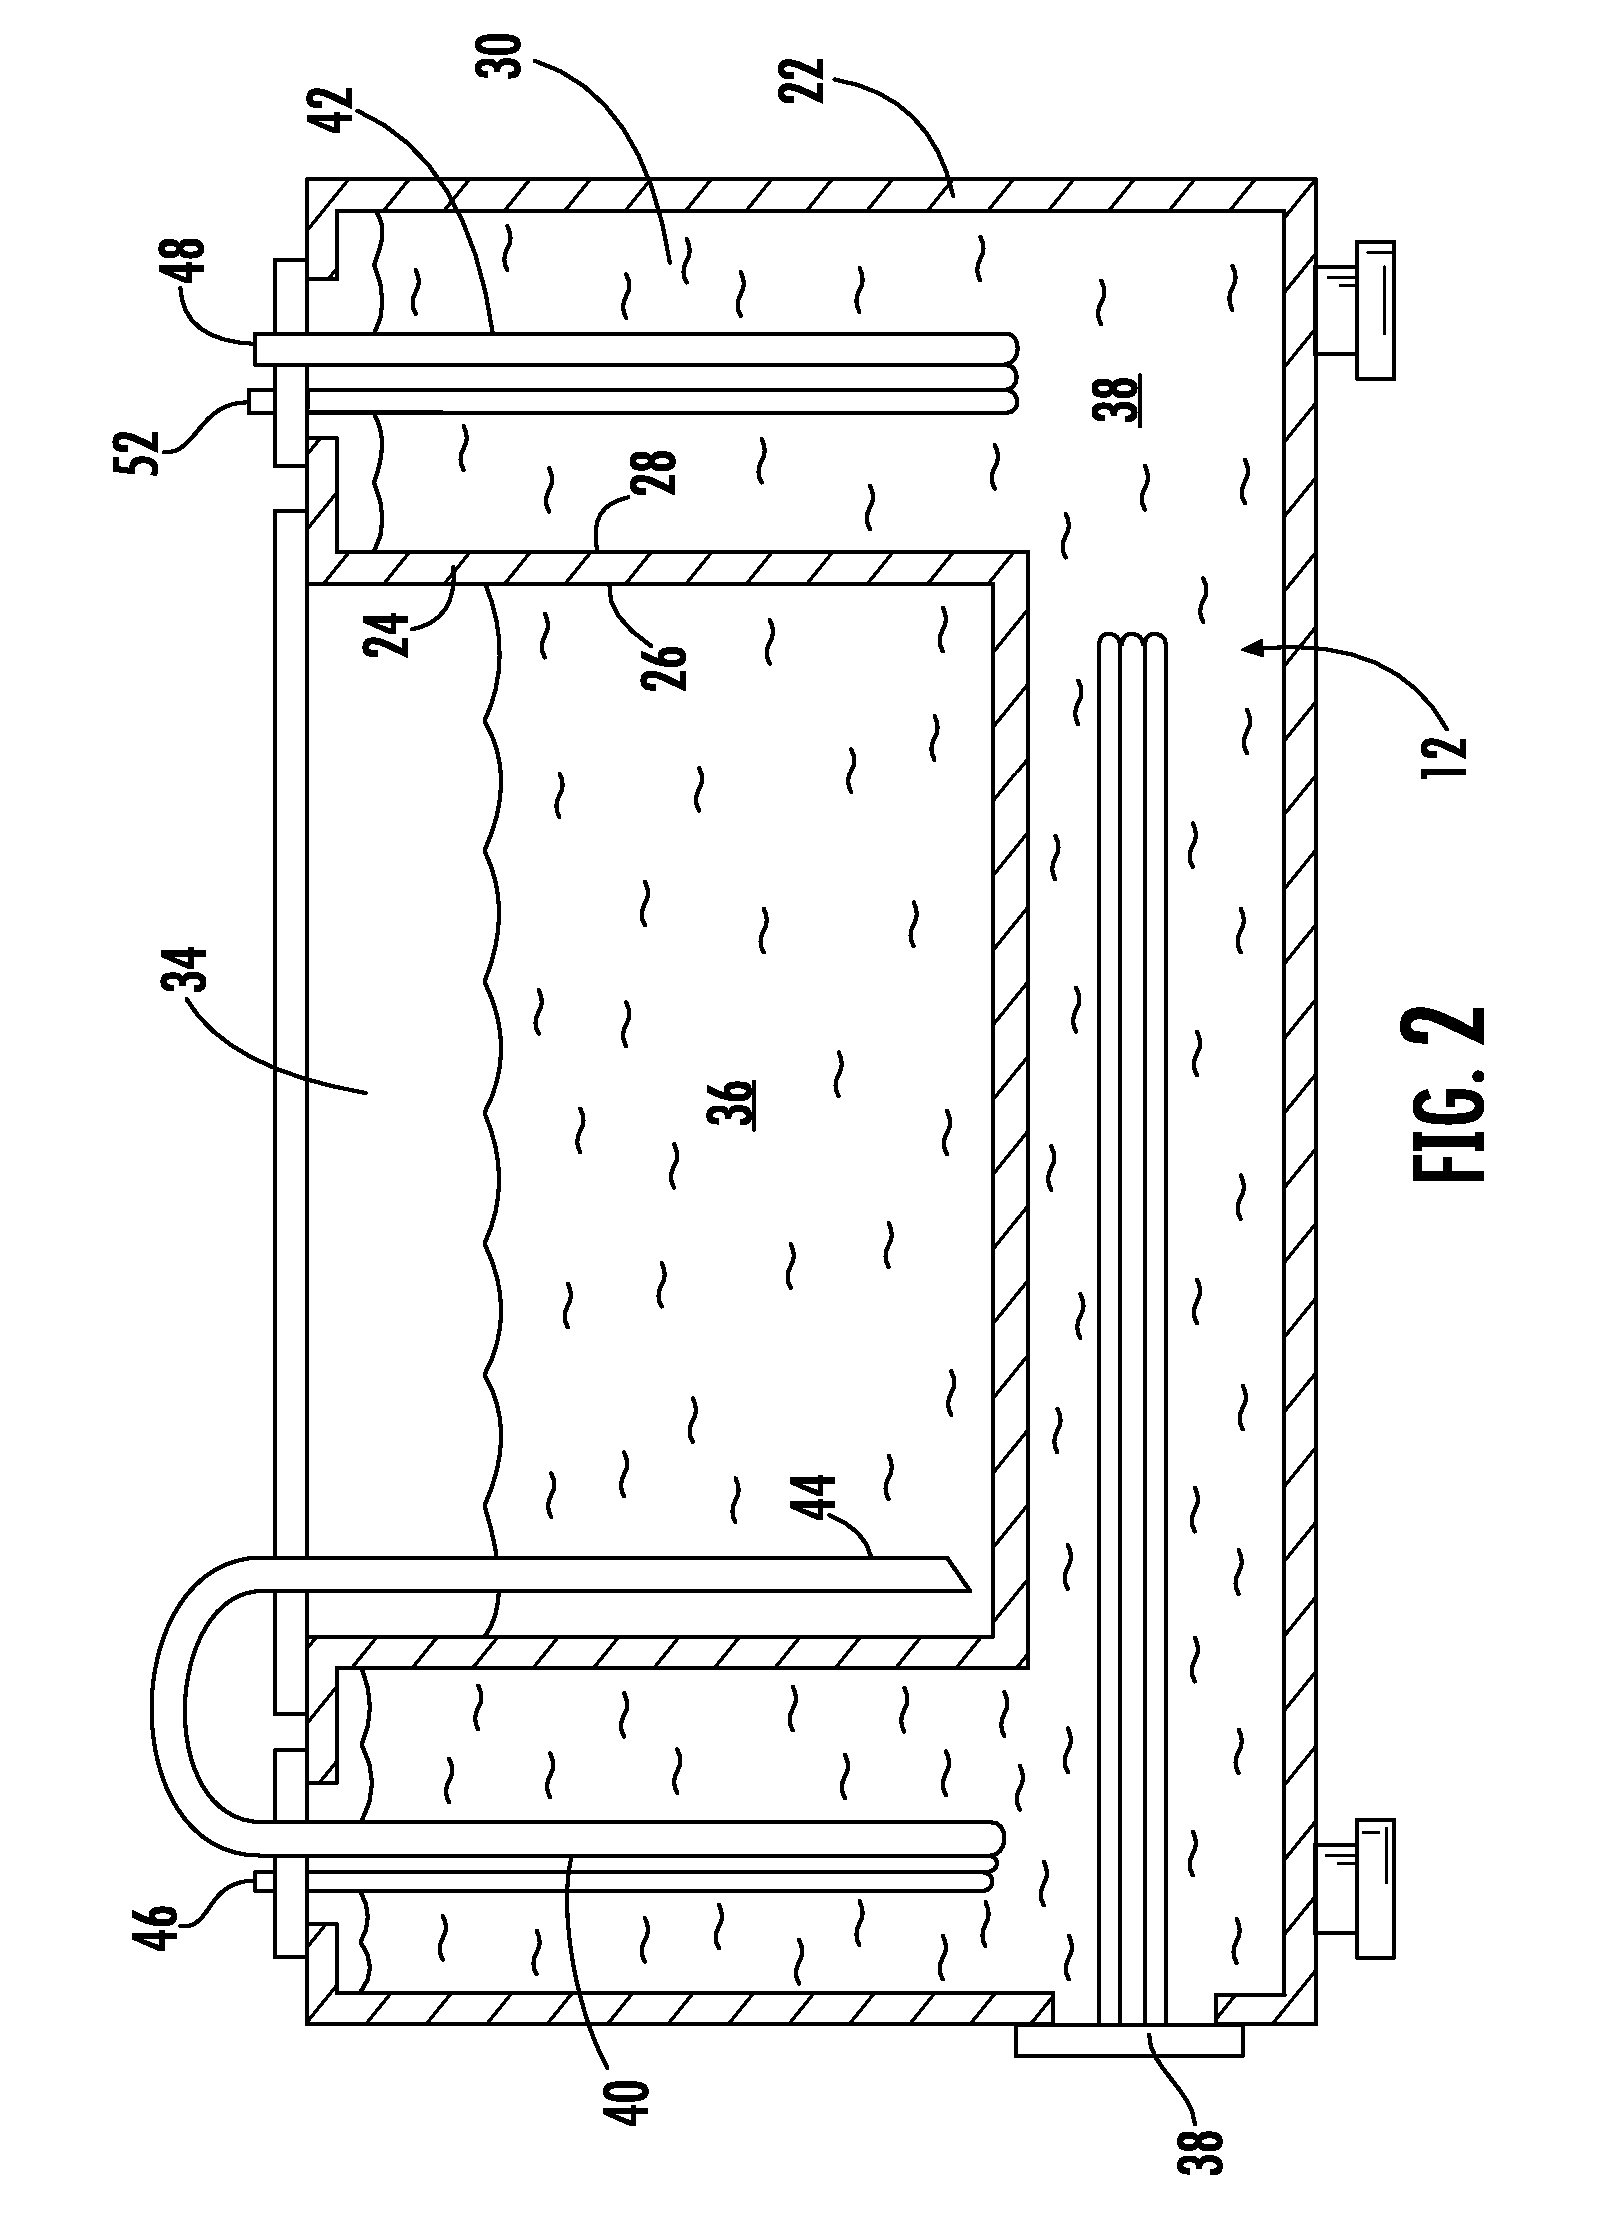 Method and system for preheating epoxy coatings for spray application